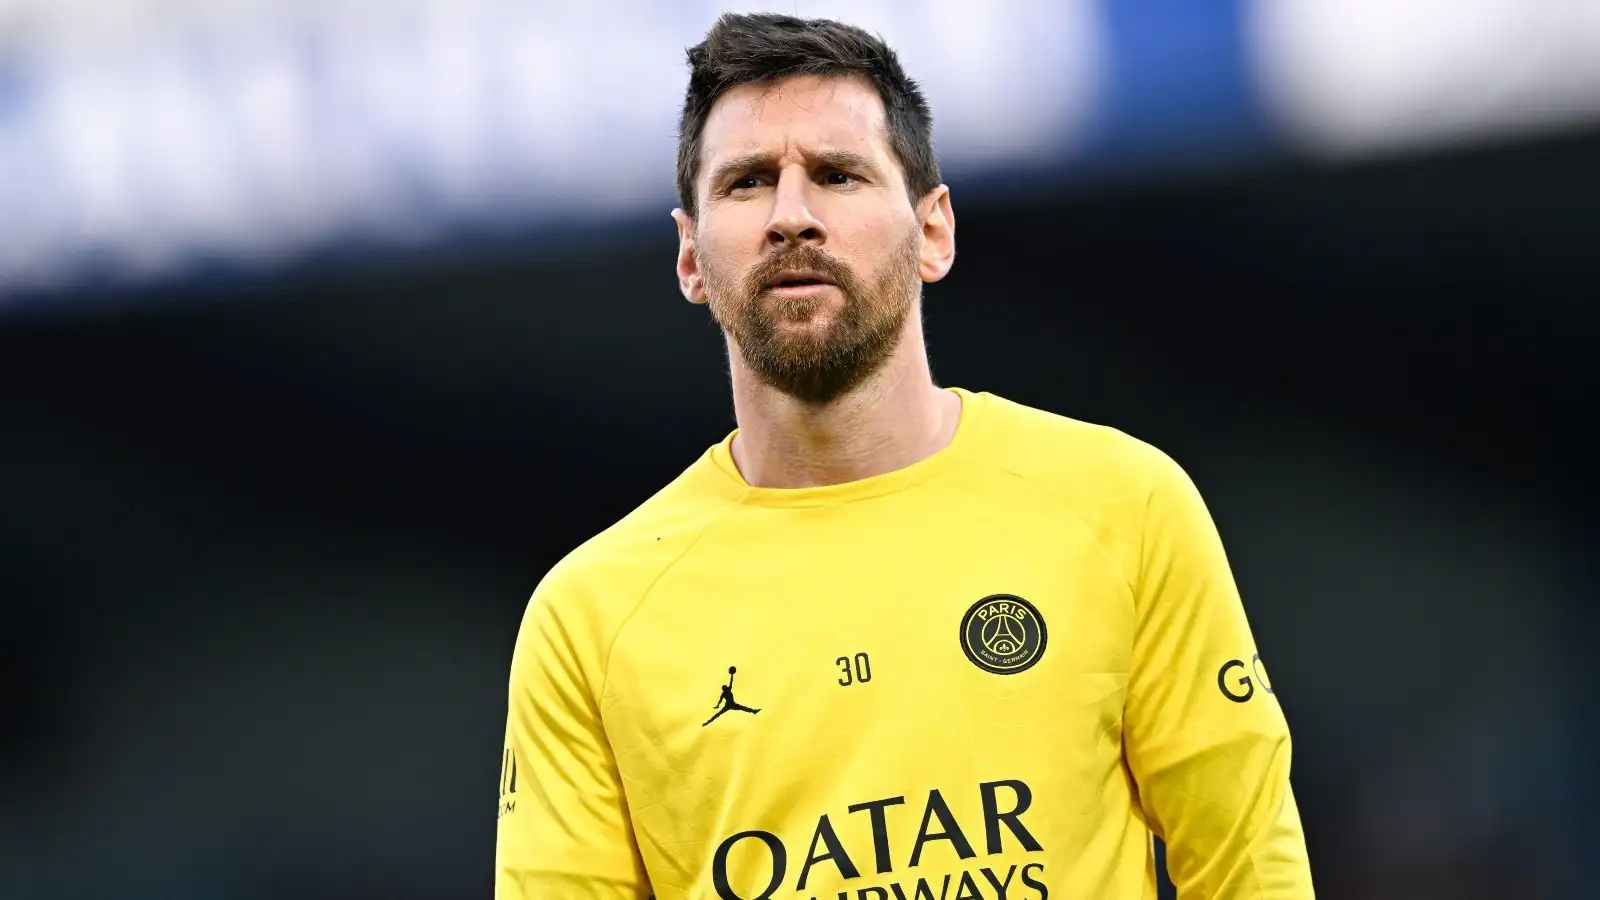 PSG star Lionel Messi looks serious